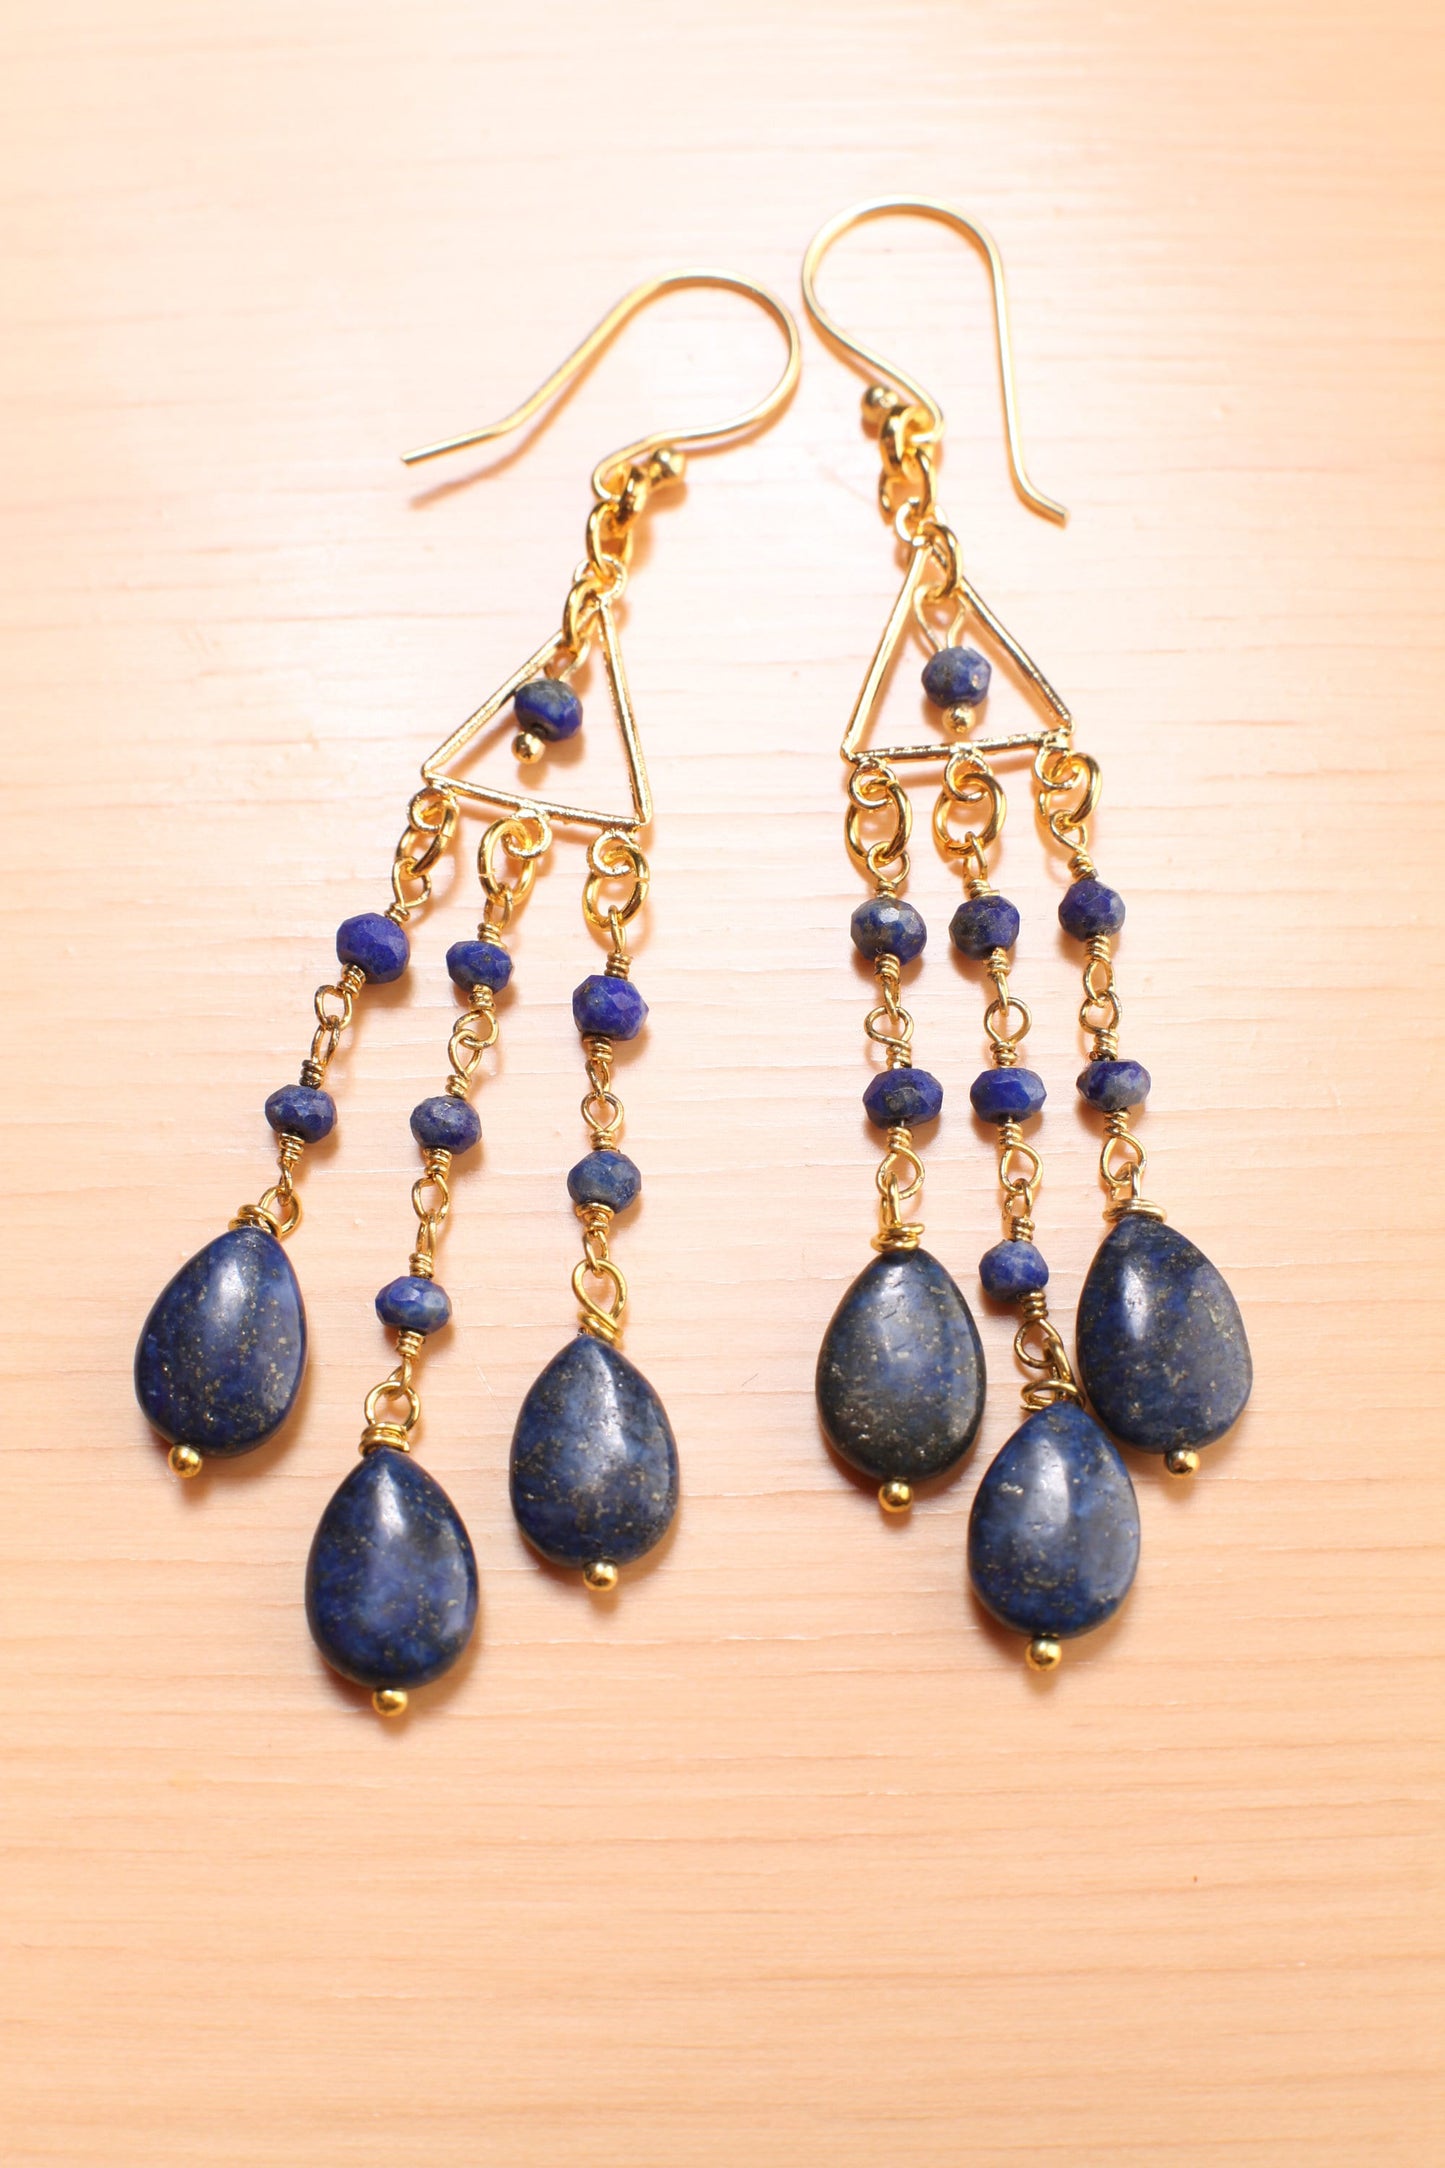 Lapis Lazuli Earrings, Natural Lapis 7x10 Oval Wire Wrapped Dangling drop with Faceted Lapis Rondel chain,Gold Chandelier, vermeil Ear Wire,